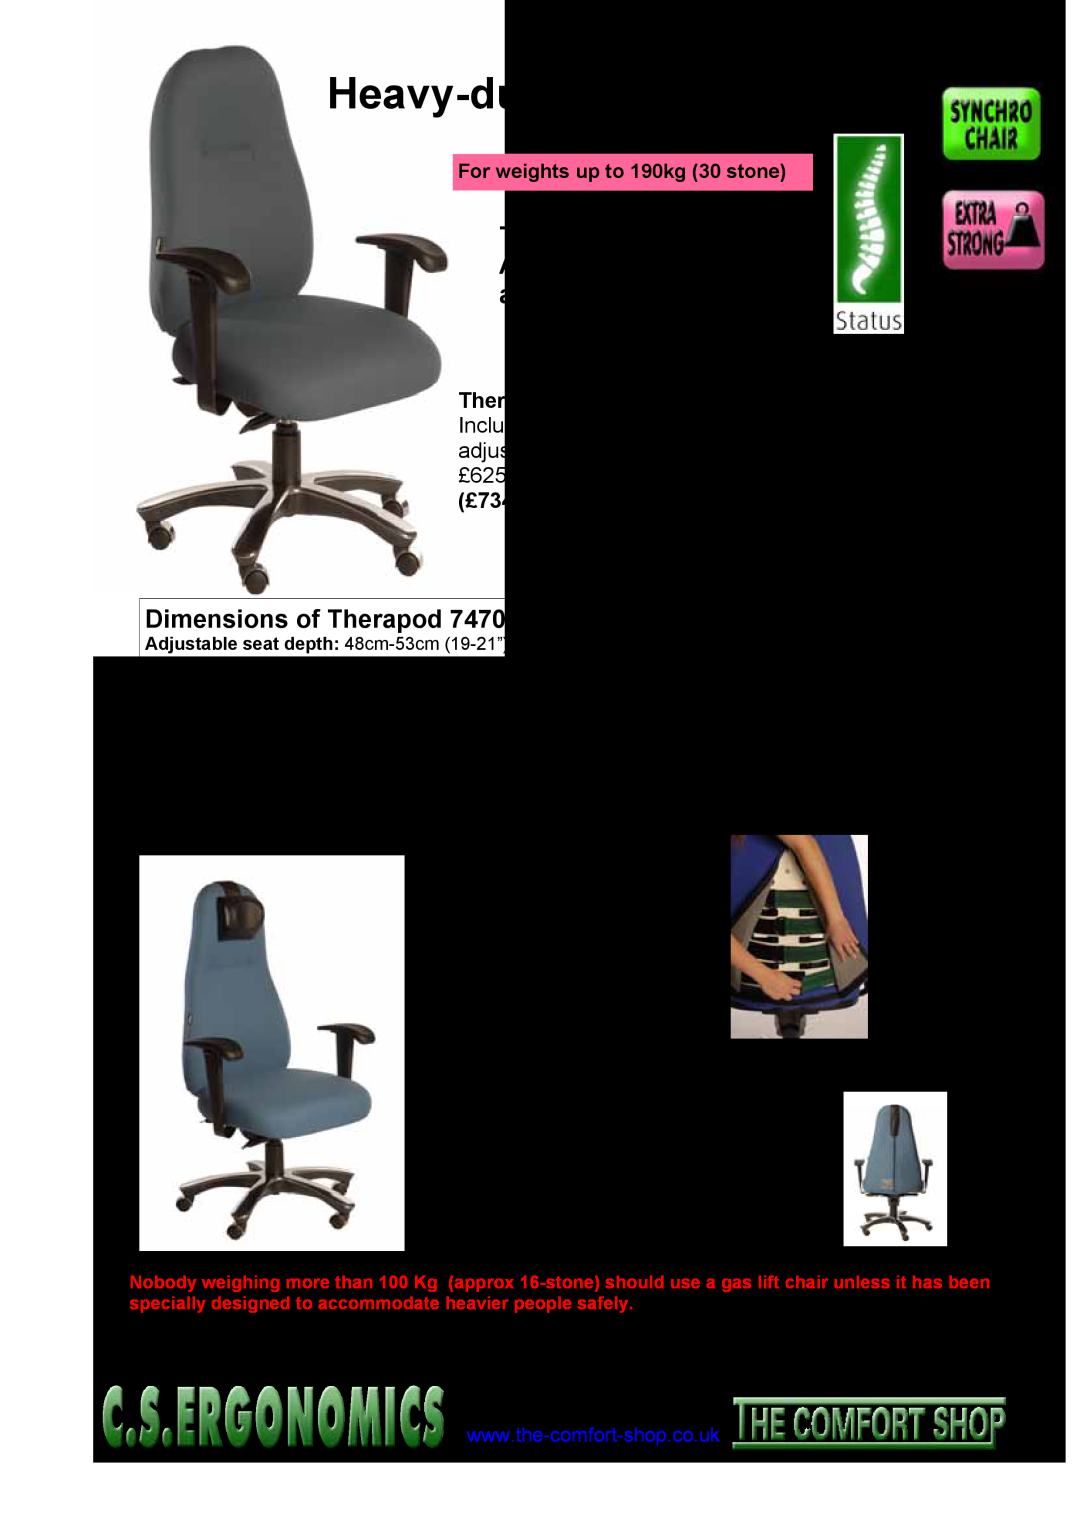 Fellowes RH 300, RH 400 manual Features, Dimensions of Therapod, Heavy-dutychairs, £734.38, £793.14 